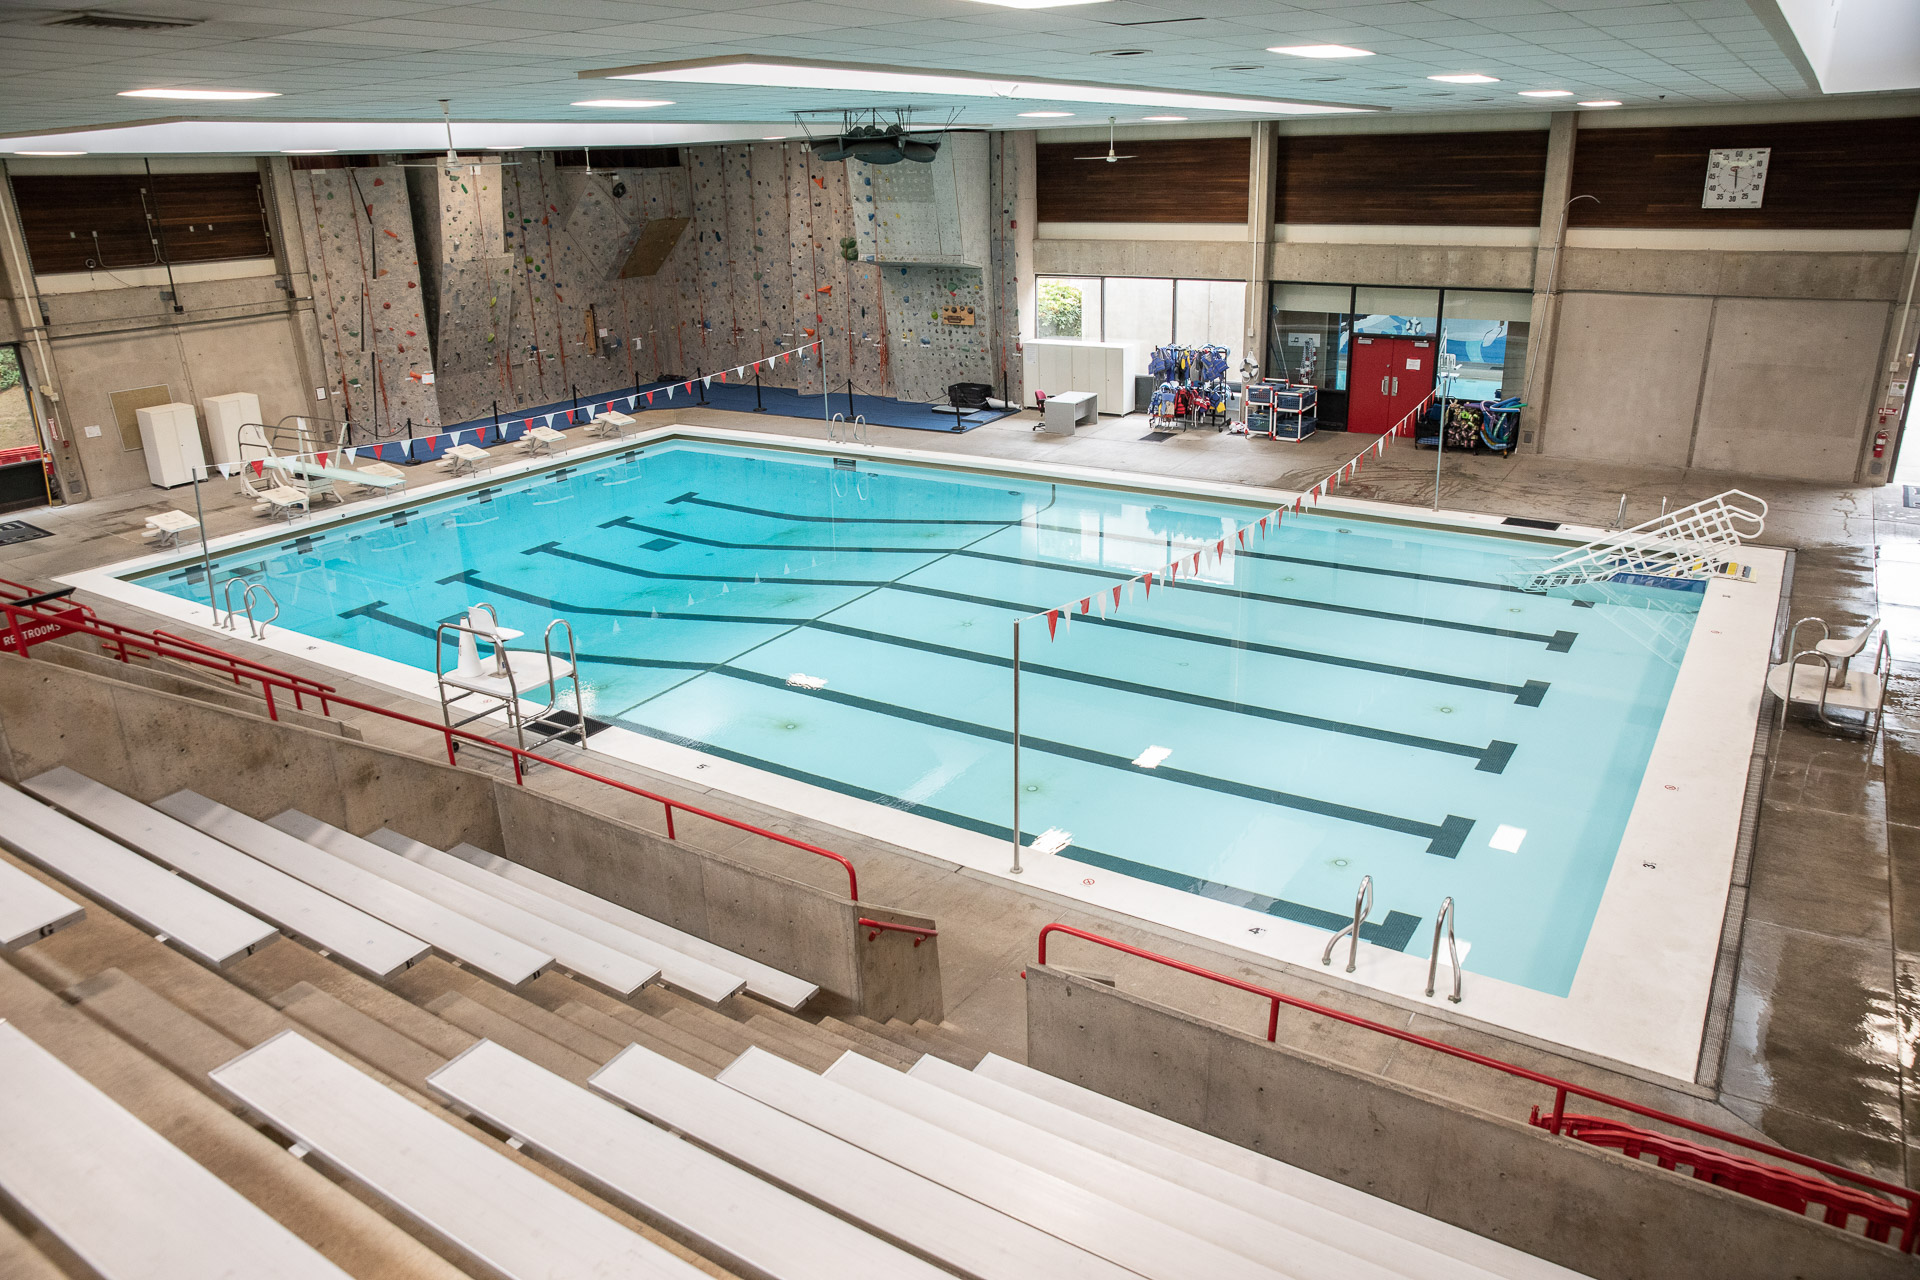 View of the indoor 25-yd pool from the bleachers